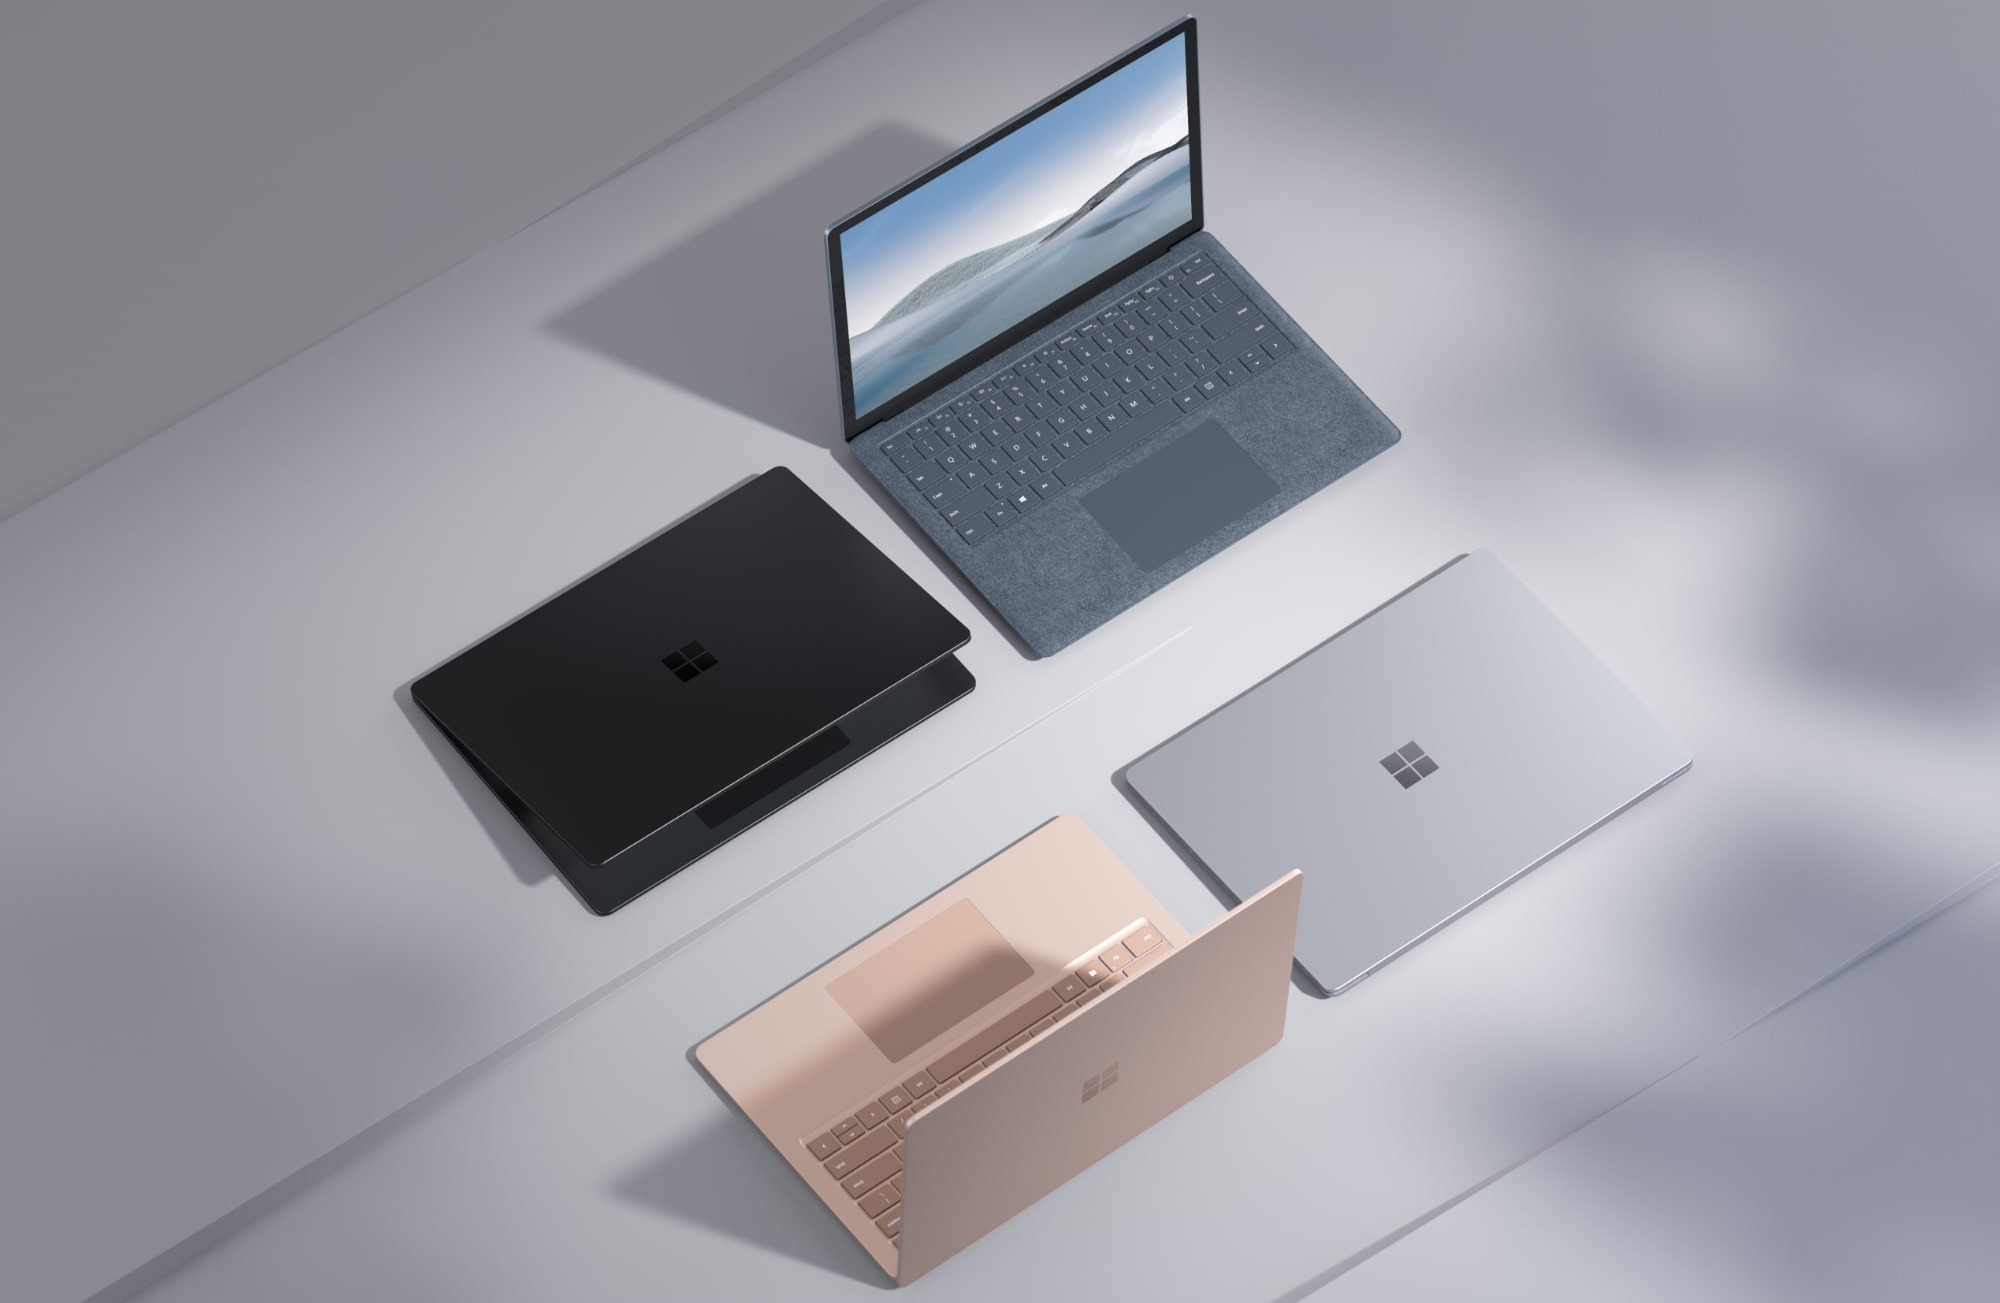 Microsoft Surface Laptop 4: old design, updated hardware and price starting from $999